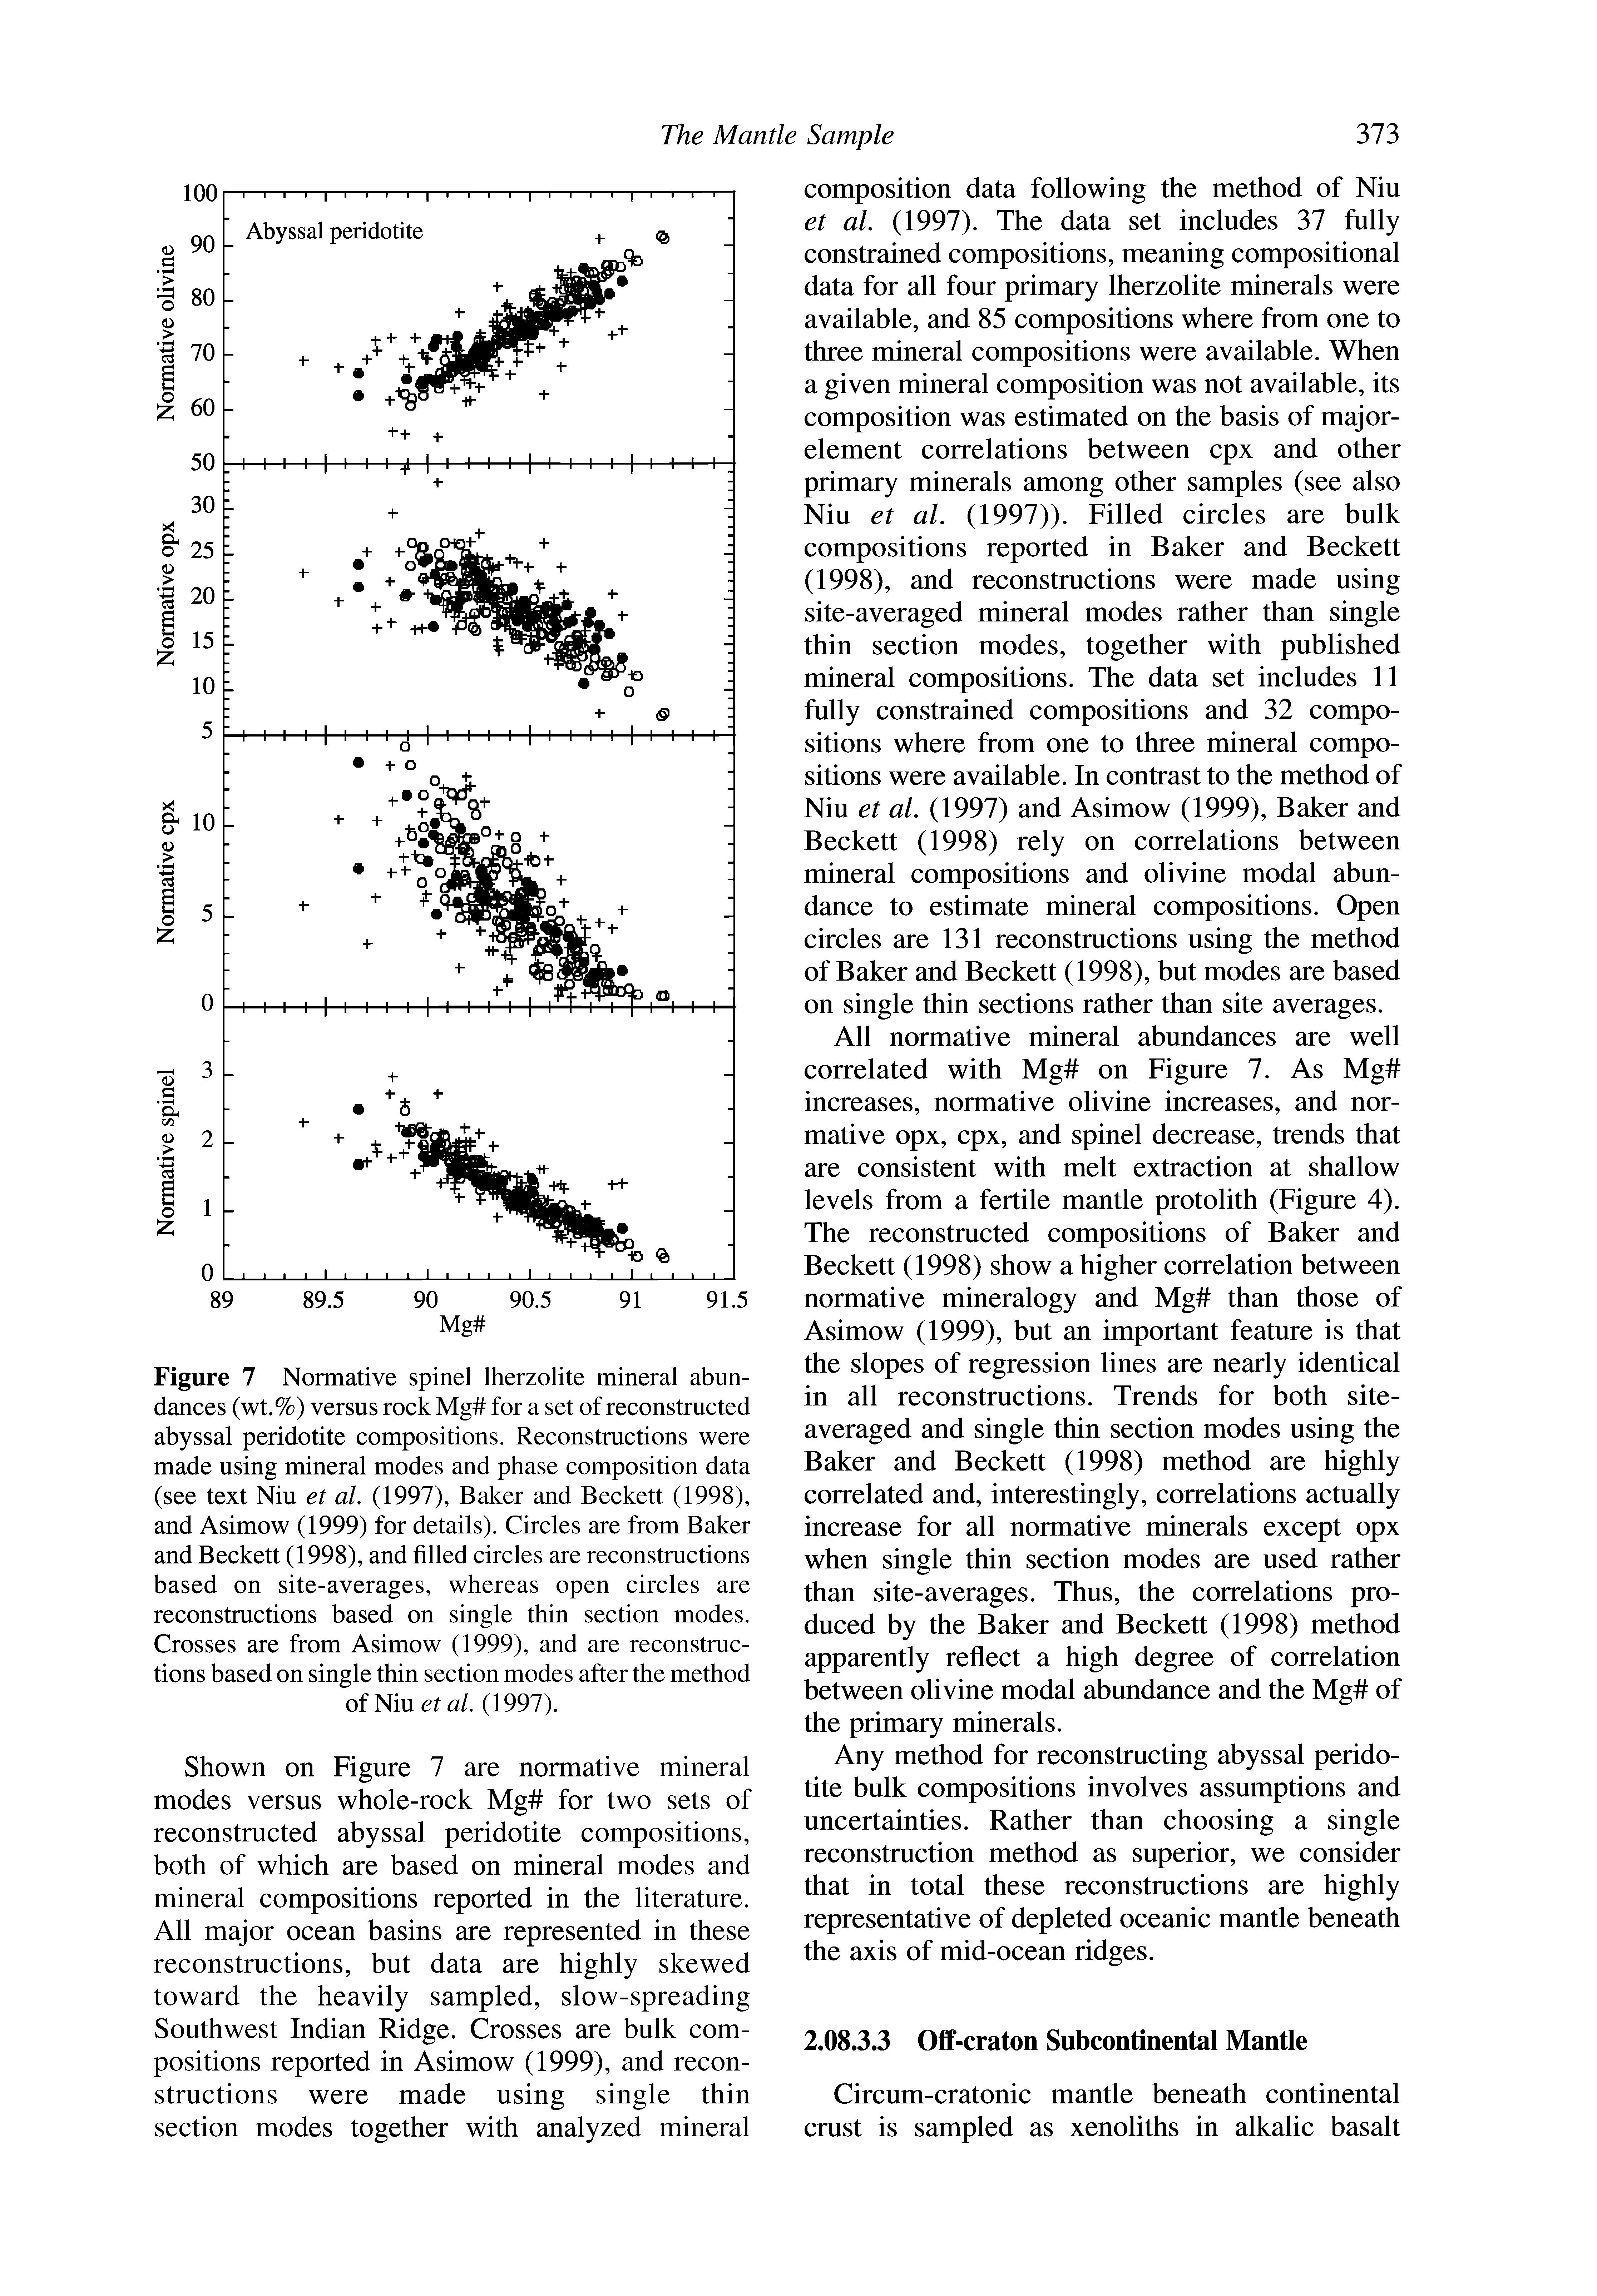 Figure 7 Normative spinel Iherzolite mineral abundances (wt.%) versus rock Mg for a set of reconstructed abyssal peridotite compositions. Reconstructions were made using mineral modes and phase composition data (see text Niu et al. (1997), Baker and Beckett (1998), and Asimow (1999) for details). Circles are from Baker and Beckett (1998), and filled circles are reconstructions based on site-averages, whereas open circles are reconstructions based on single thin section modes. Crosses are from Asimow (1999), and are reconstructions based on single thin section modes after the method of Niu et al (1997).